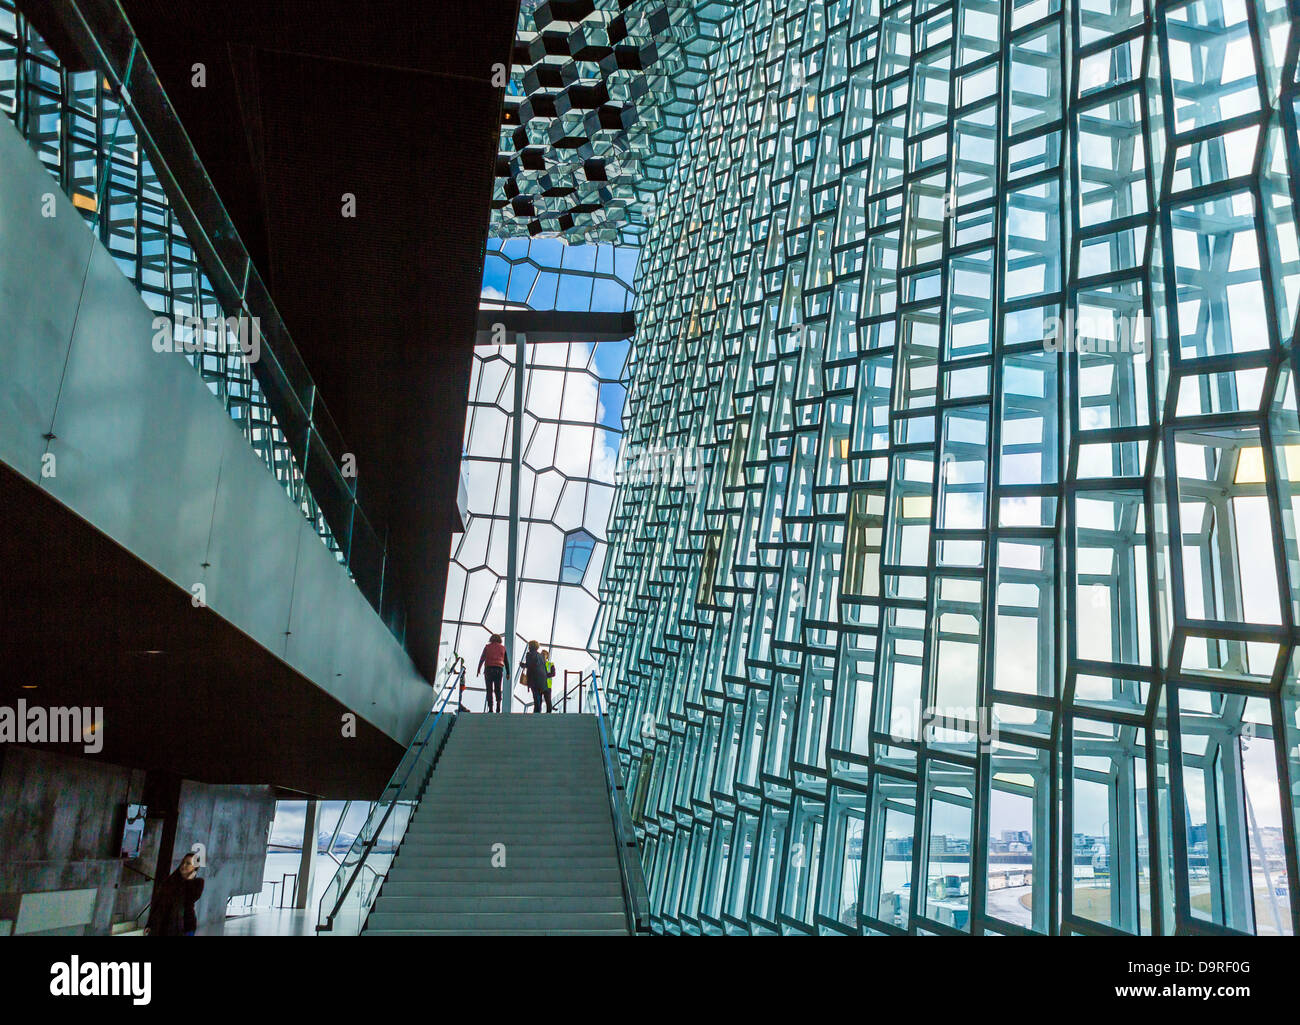 Interior of Harpa Concert Hall and Conference Center, Reykjavik, Iceland. Stock Photo